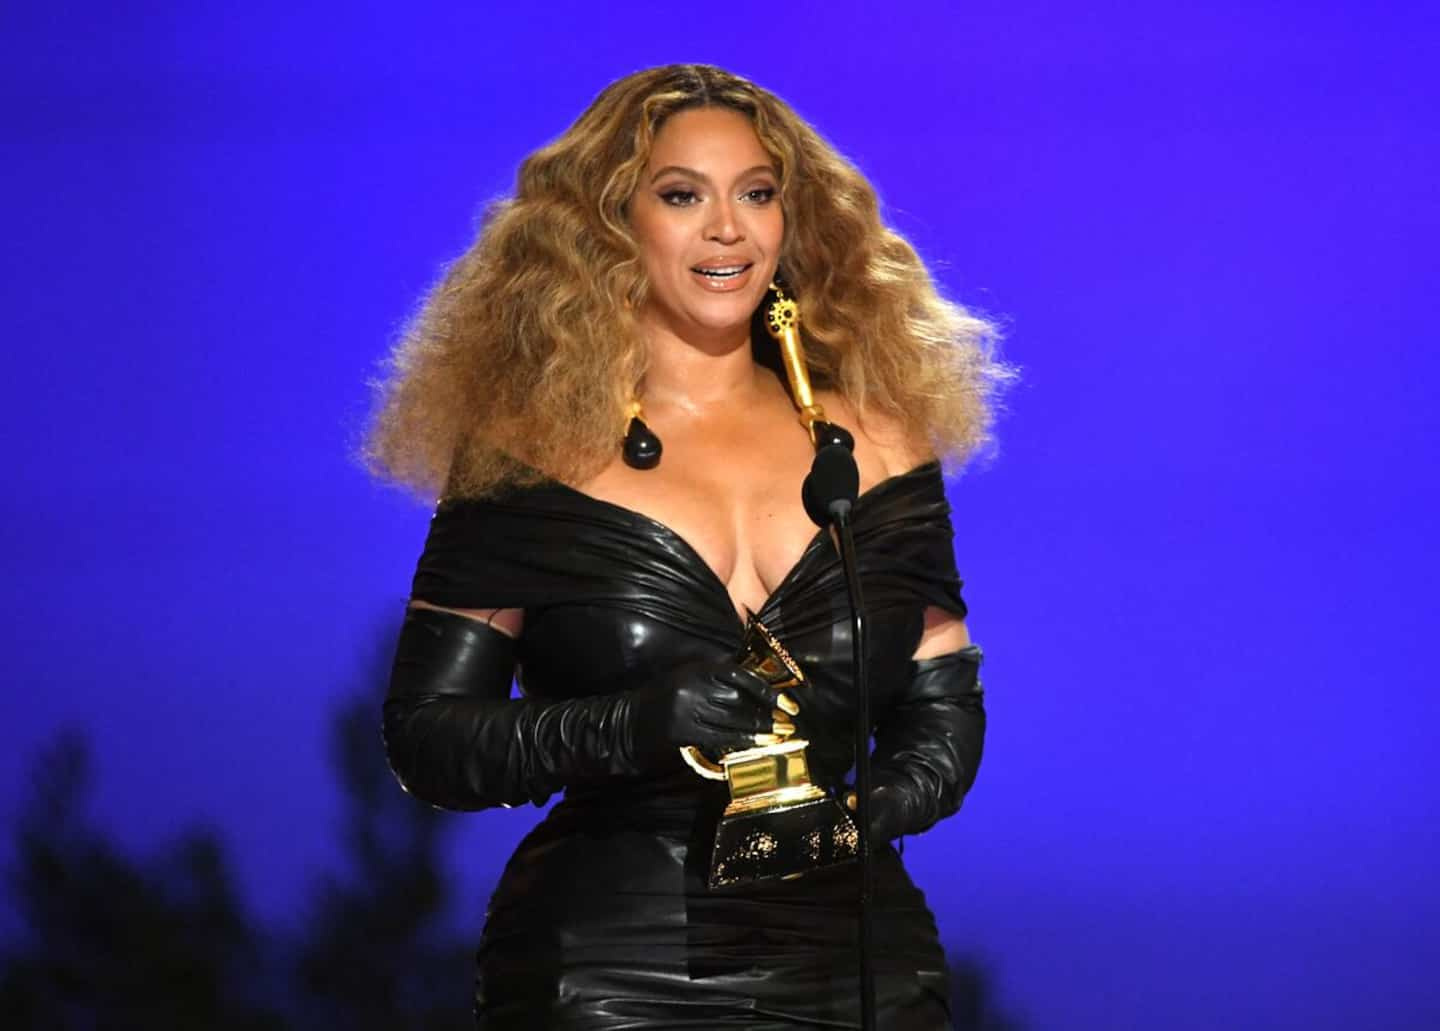 Musical event of the summer, Beyoncé releases her 7th solo album